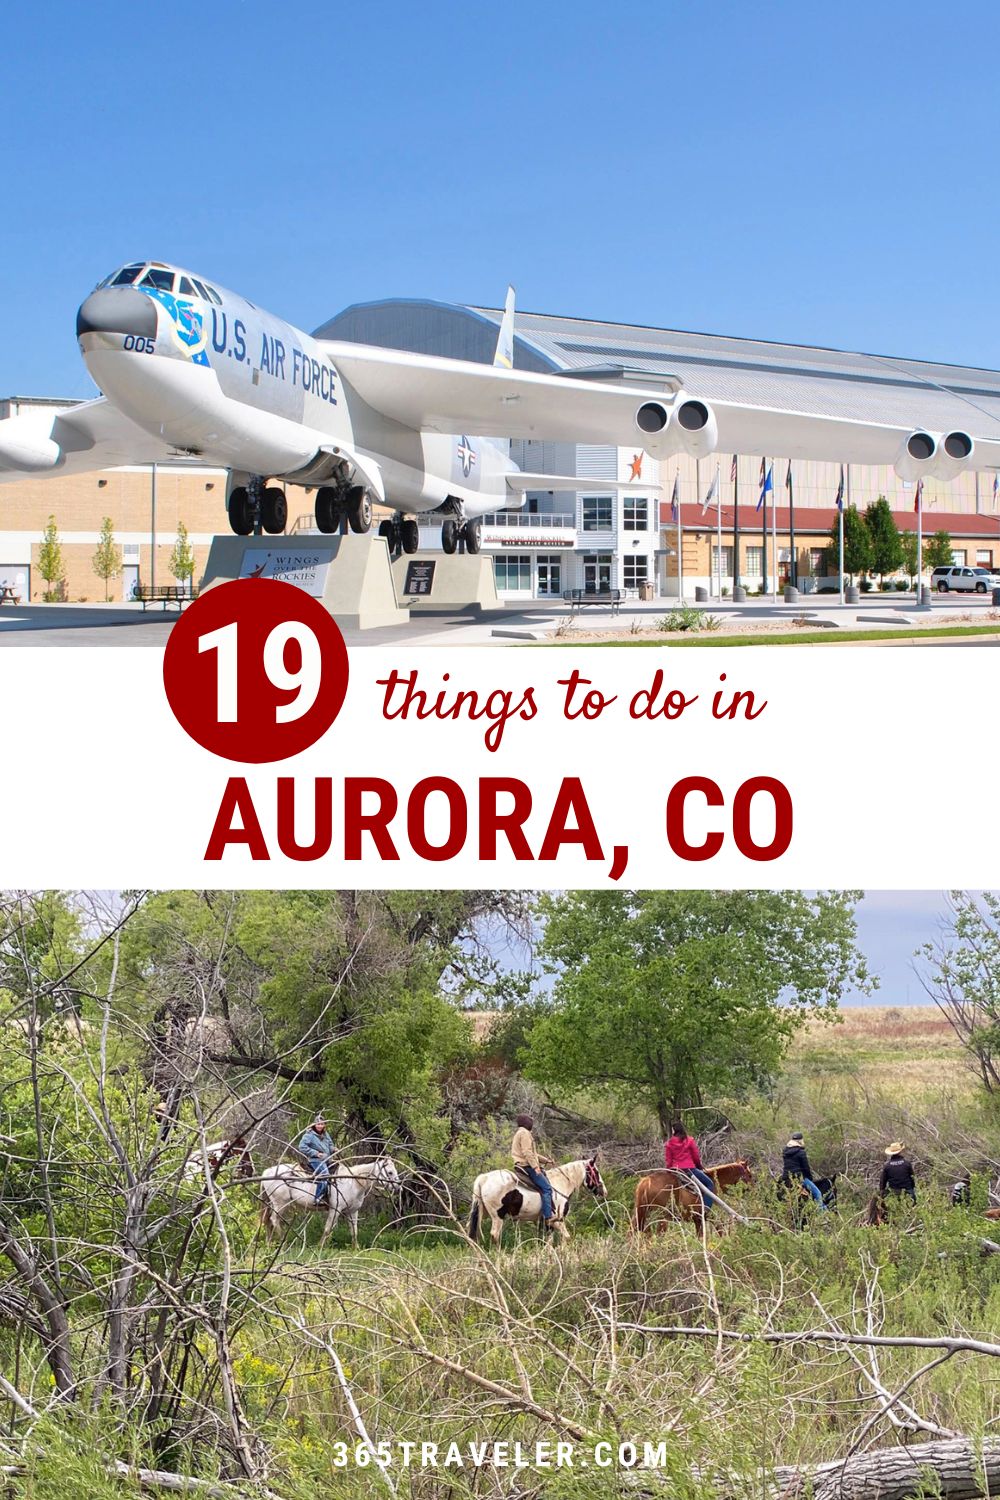 19 FUN THINGS TO DO IN AURORA CO YOU CAN'T MISS